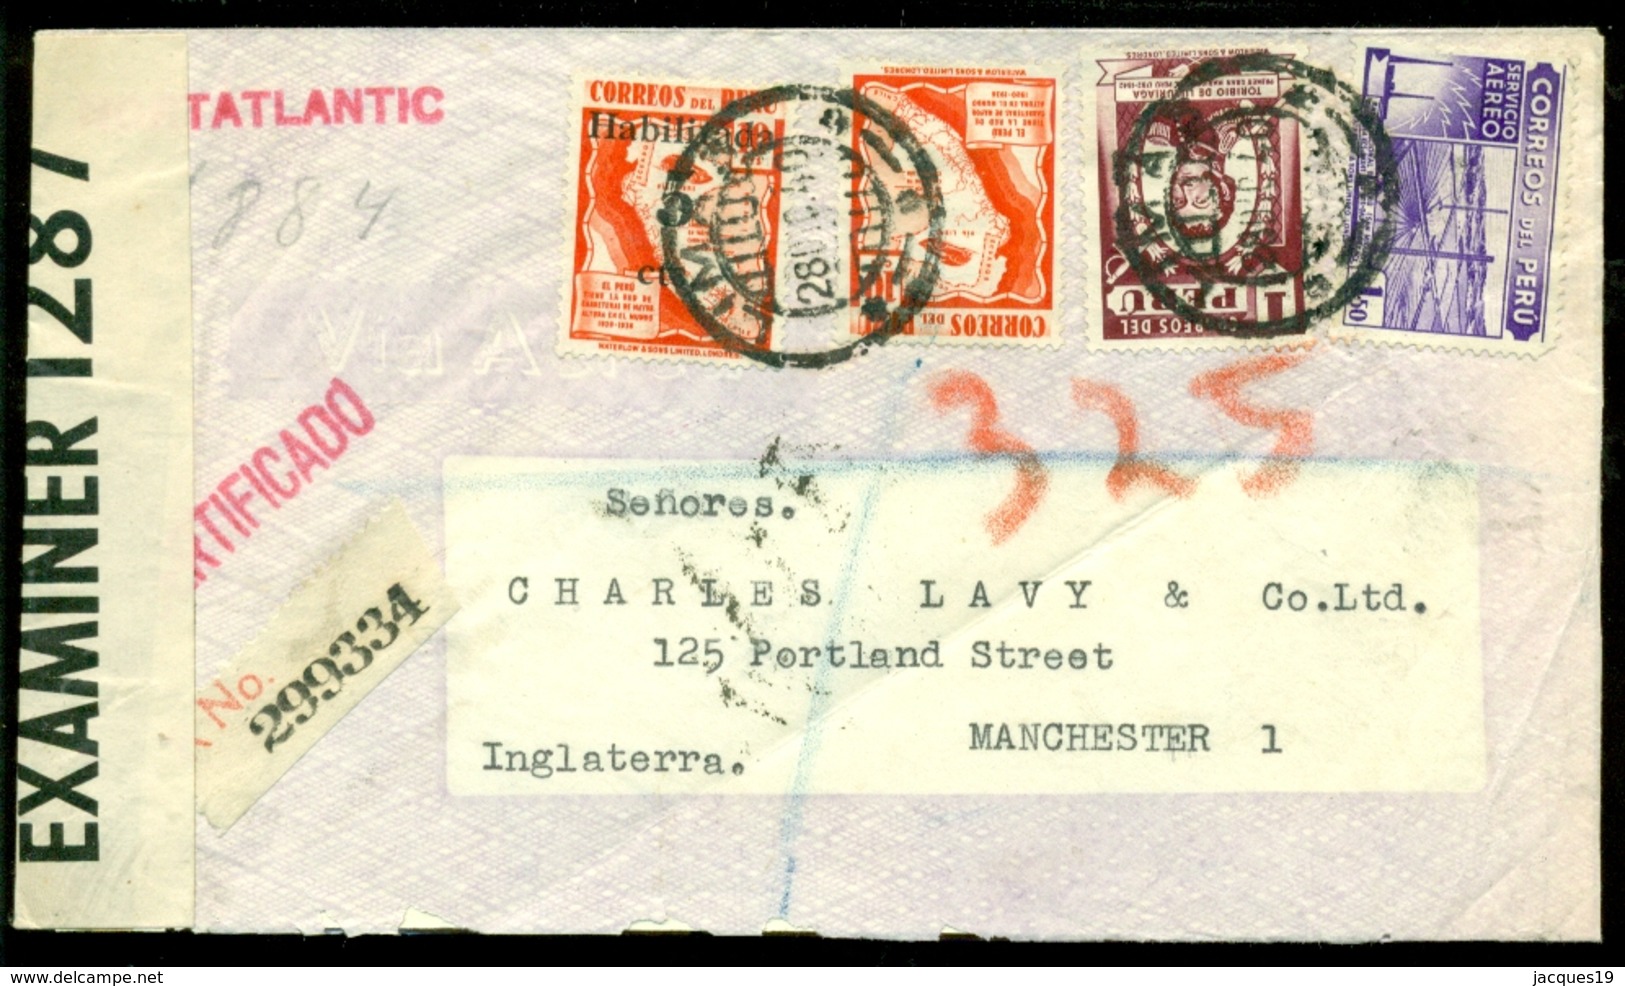 Peru 1940 Registered Airmail Cover Nortatlantic From Lima Via New York To Manchester Opened By Censor - Pérou